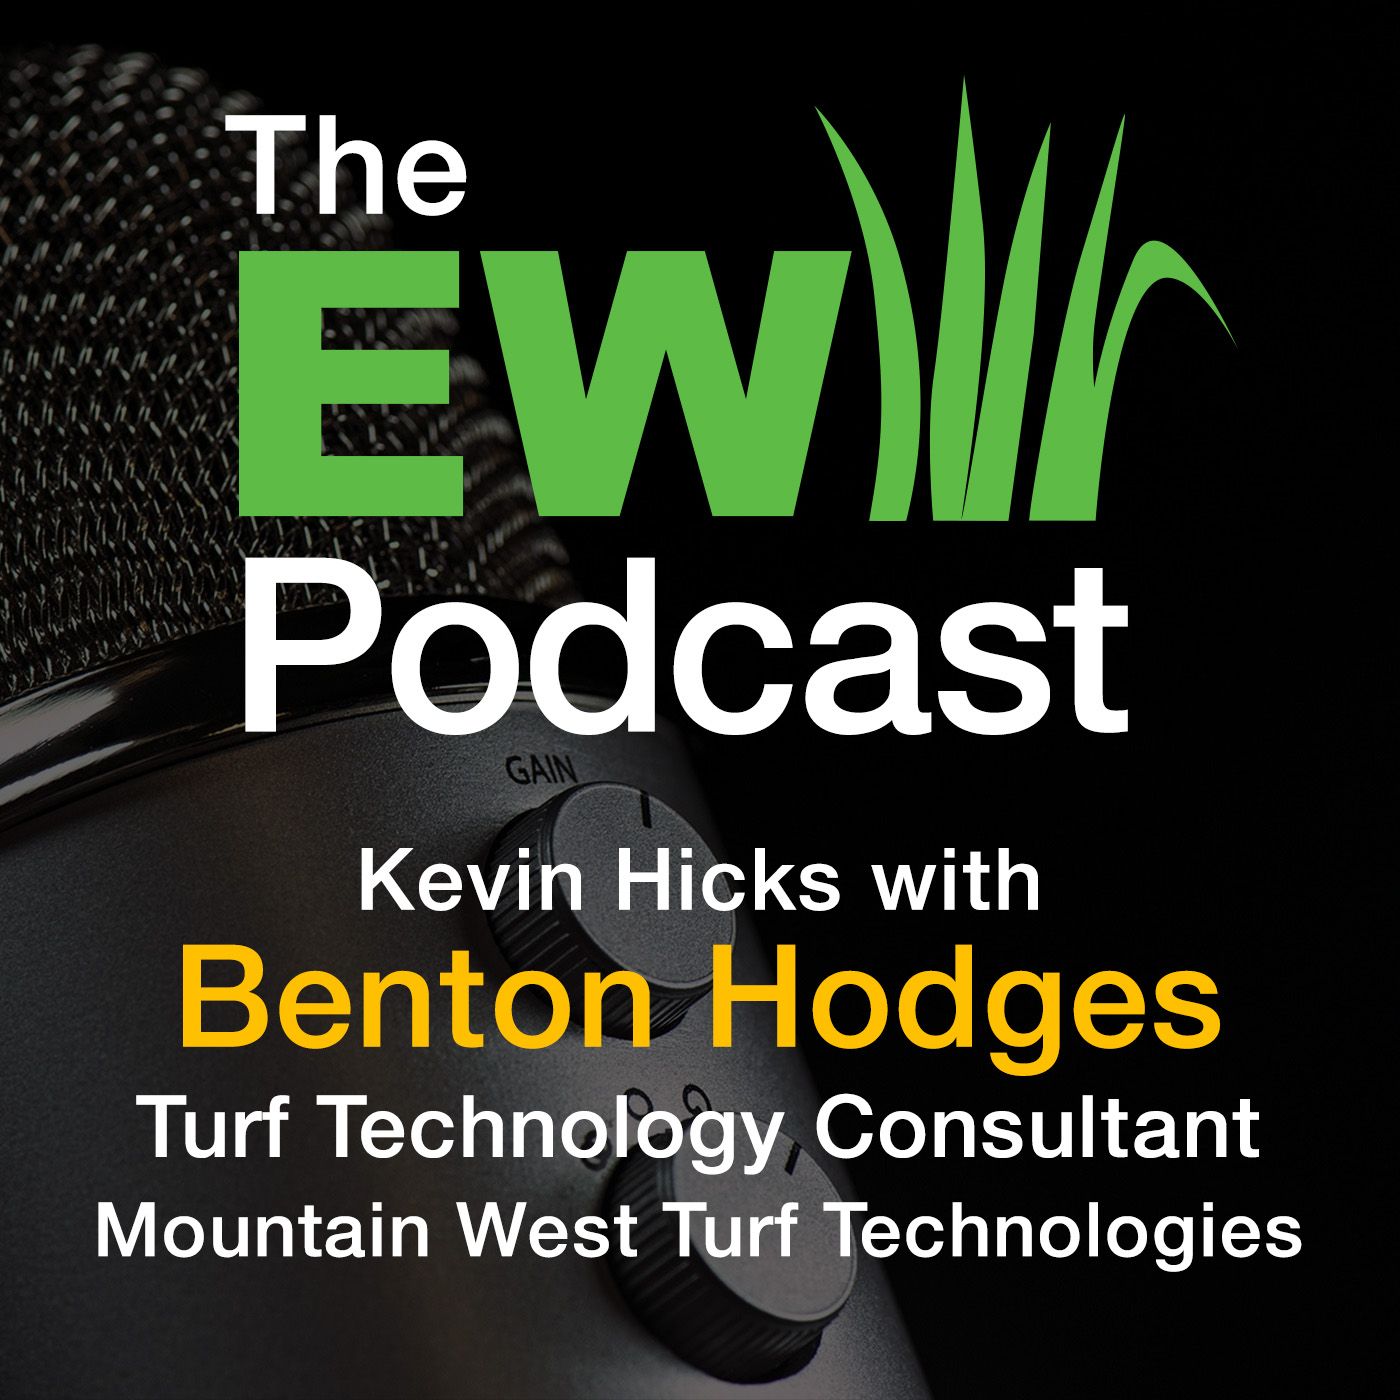 The EW Podcast - Kevin Hicks with Benton Hodges